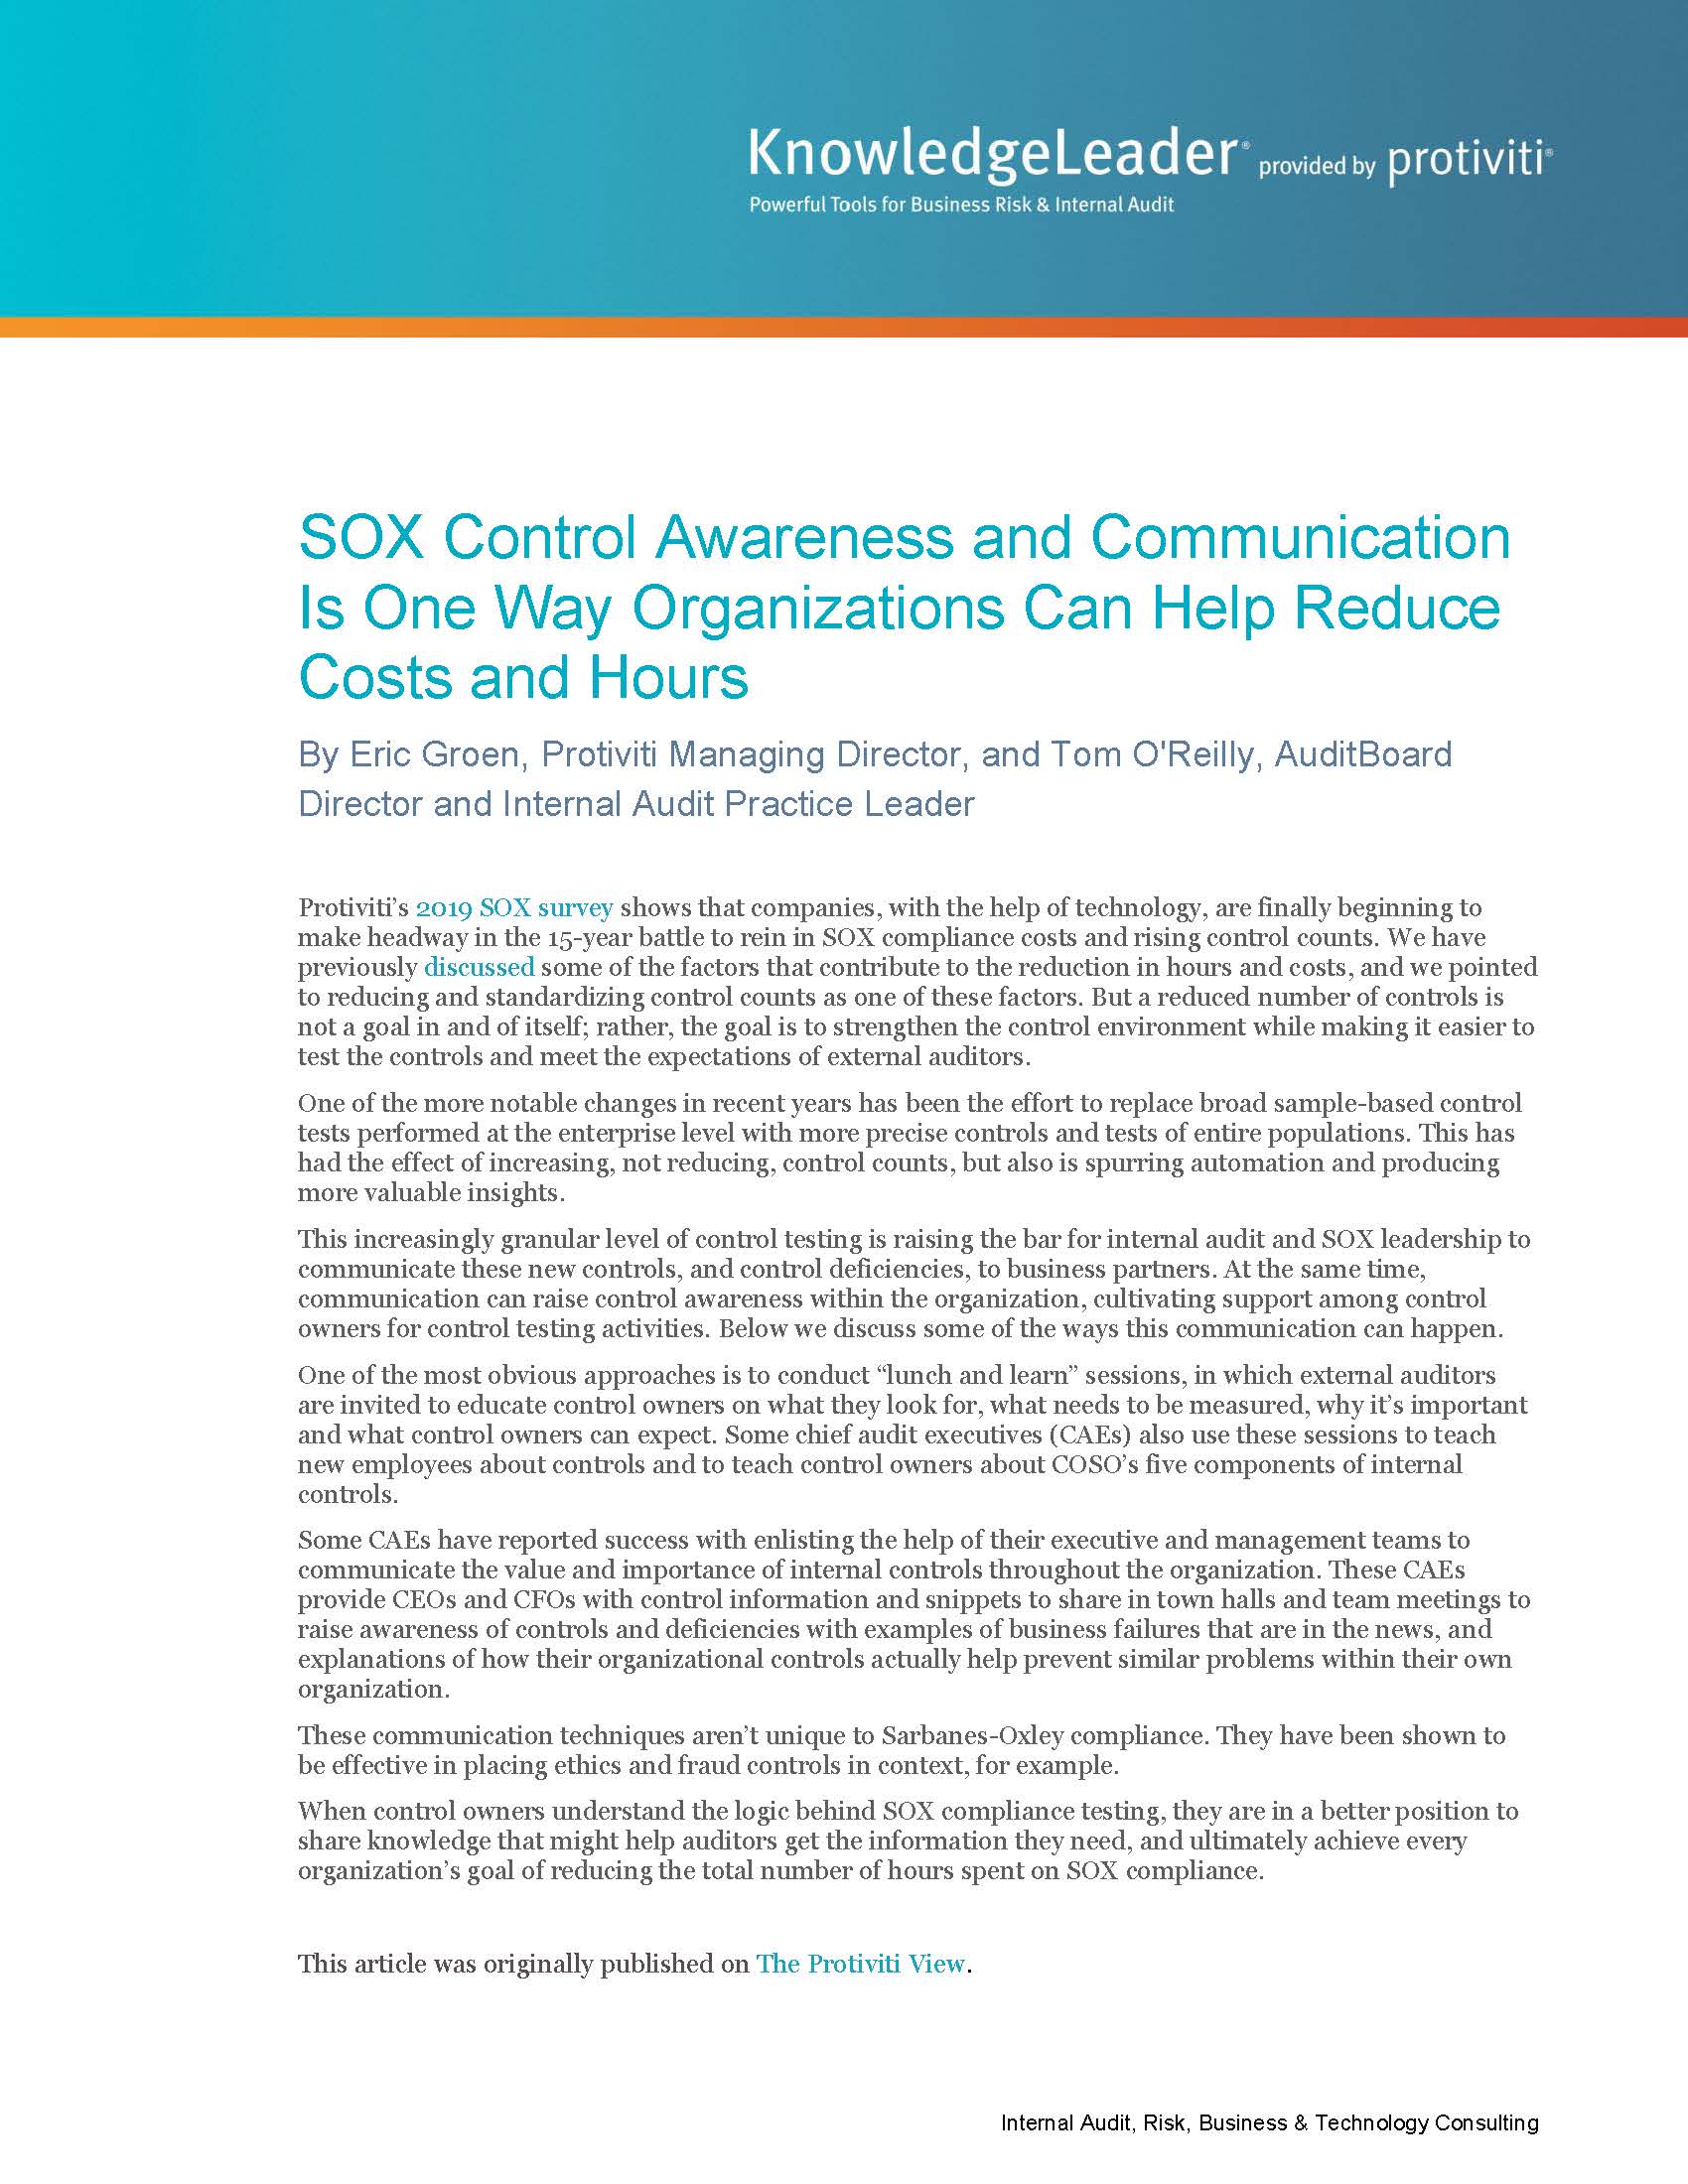 Screenshot of the first page of SOX Control Awareness and Communication Is One Way Organizations Can Help Reduce Costs and Hours